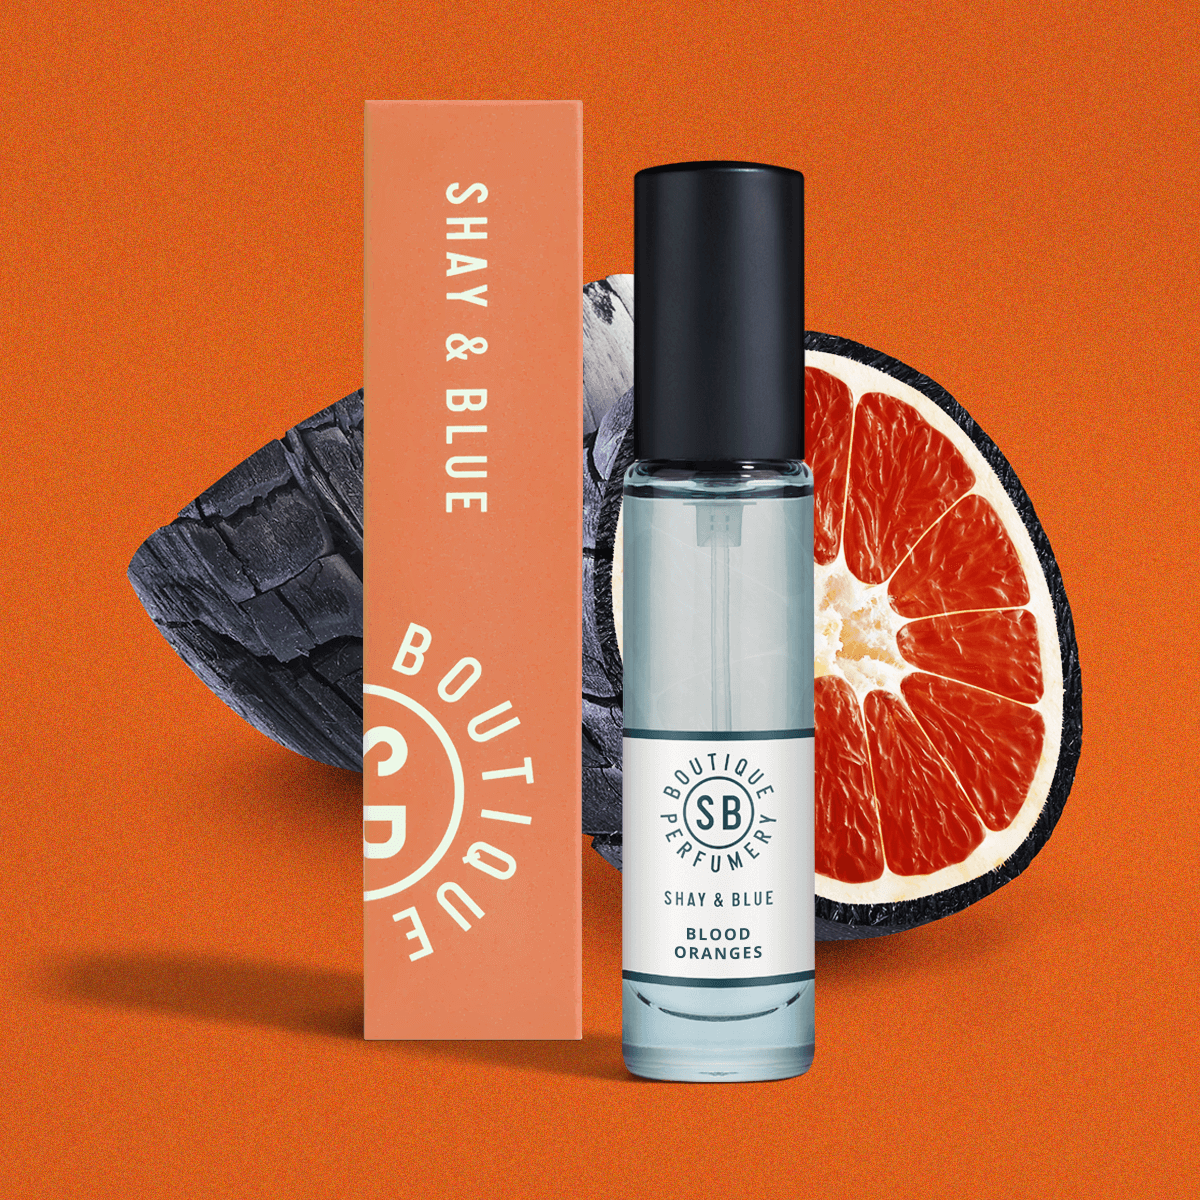 Blood Oranges Fragancia 10ml | Zesty blood oranges with rich and sensual blend of woods and smoky leather. | Fragancia Limpia para Todos los Sexos | Shay & Blue